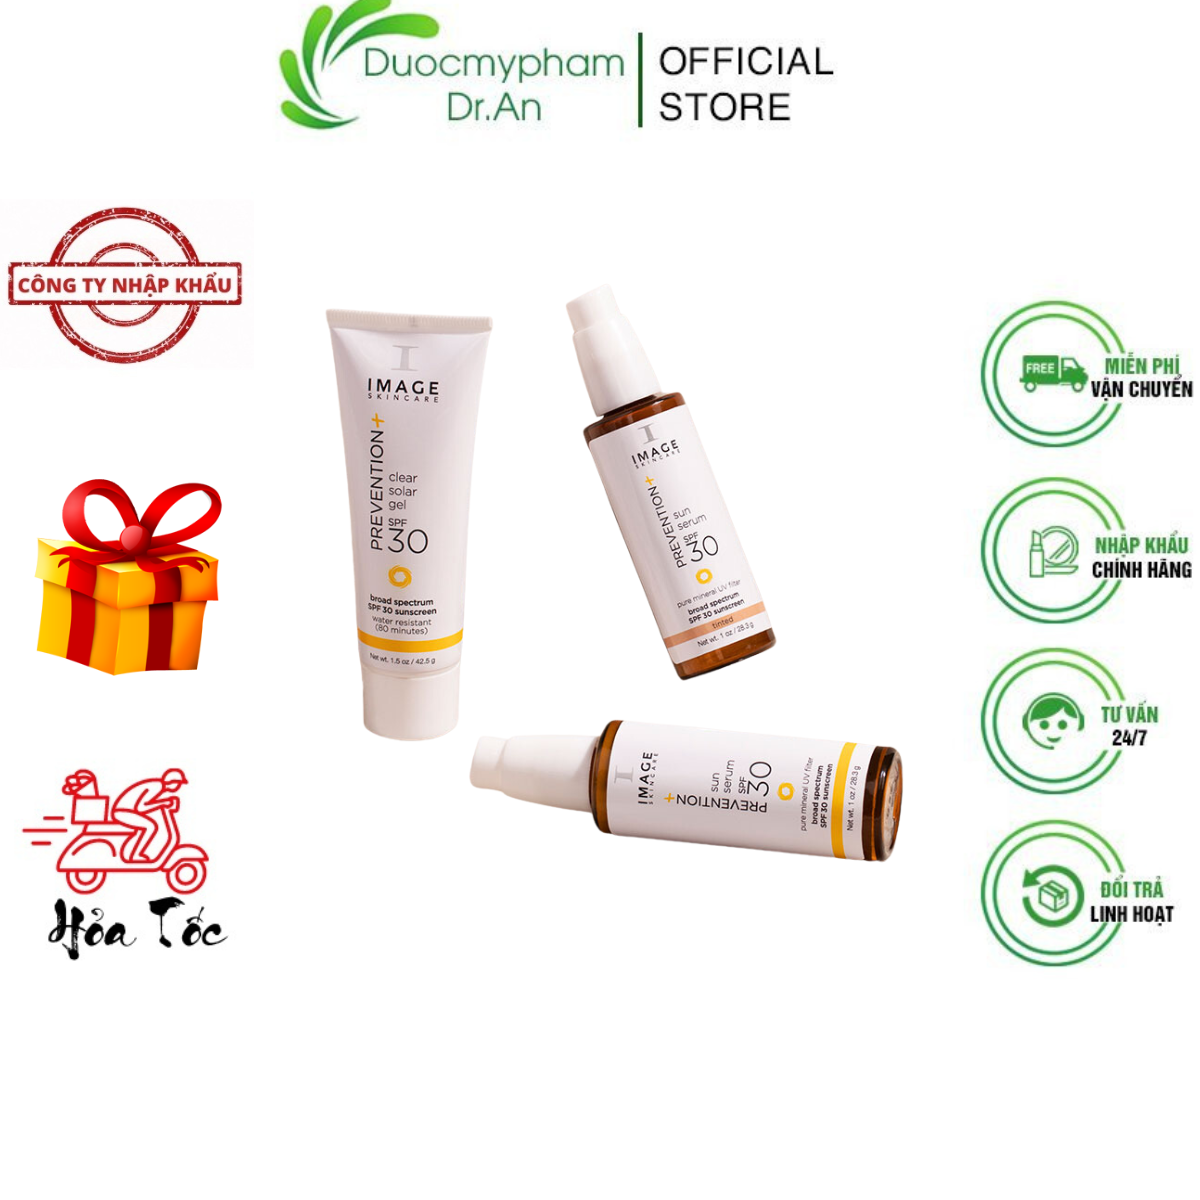 Imported imported-Image Skincare prevention Sun Serum SPF 30 + for all